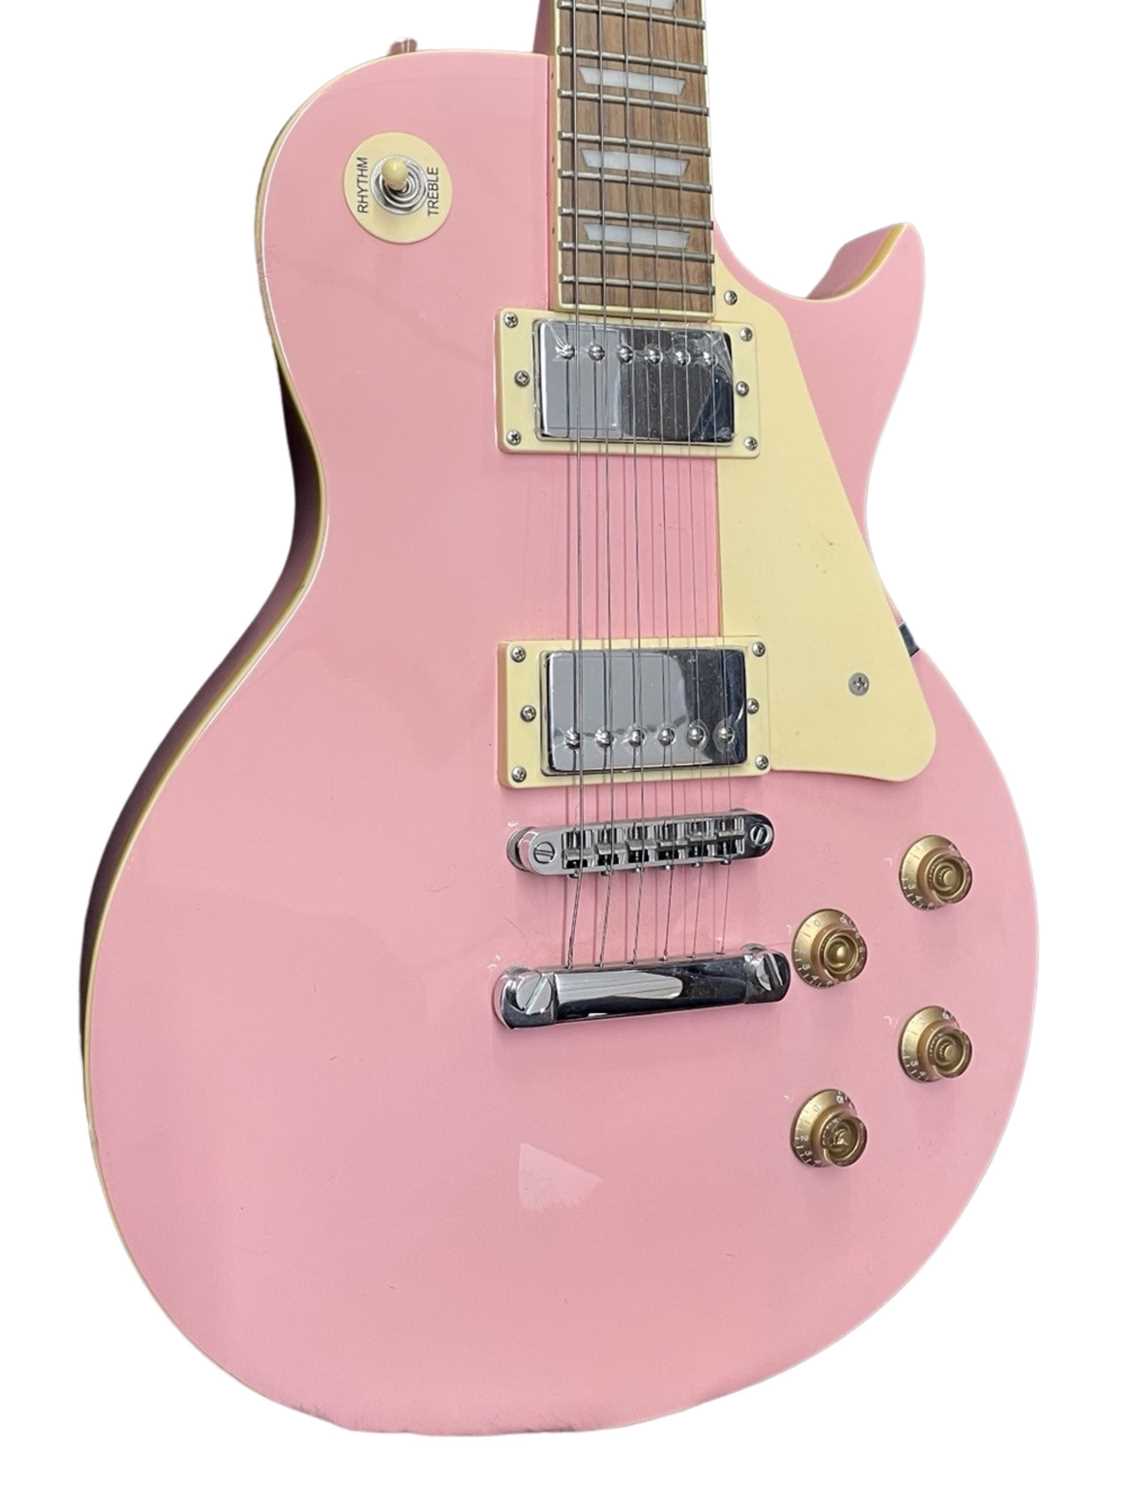 A Nevada Les Paul style electric guitar in baby pink, with fitted lined hardcase (not original to - Image 3 of 4